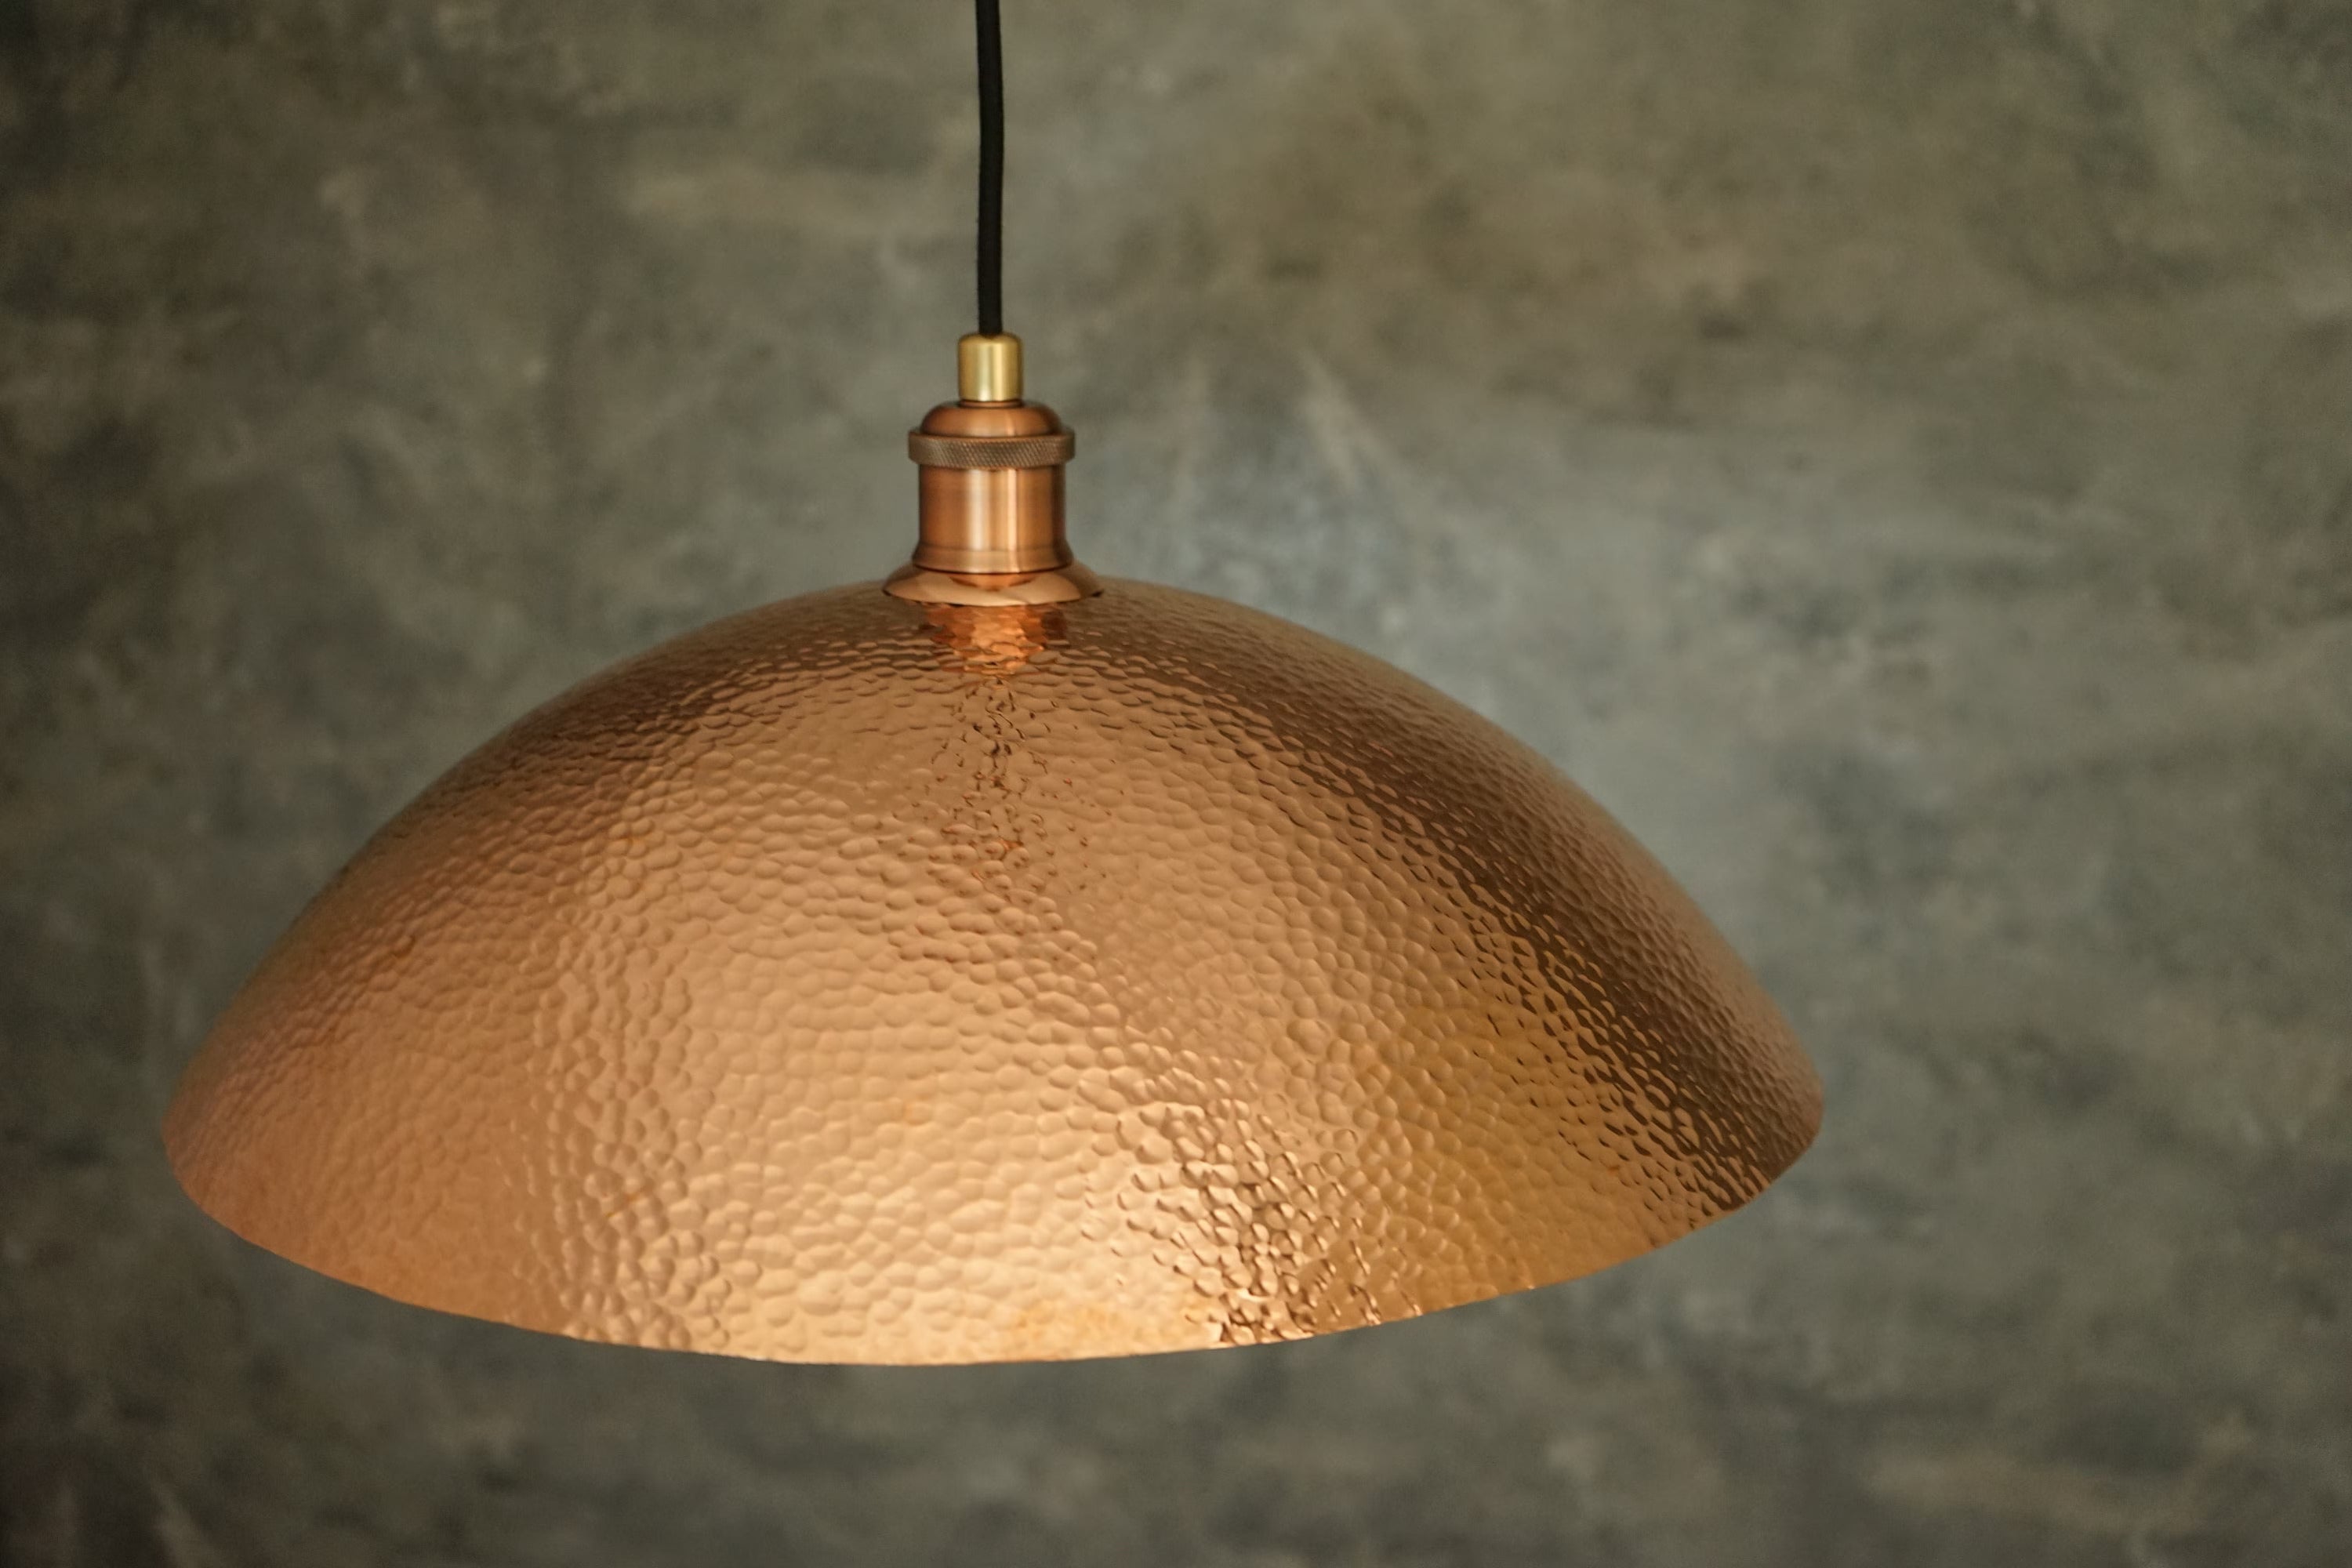 Hammered Solid Copper Dome Pendant Light, Ceiling Light